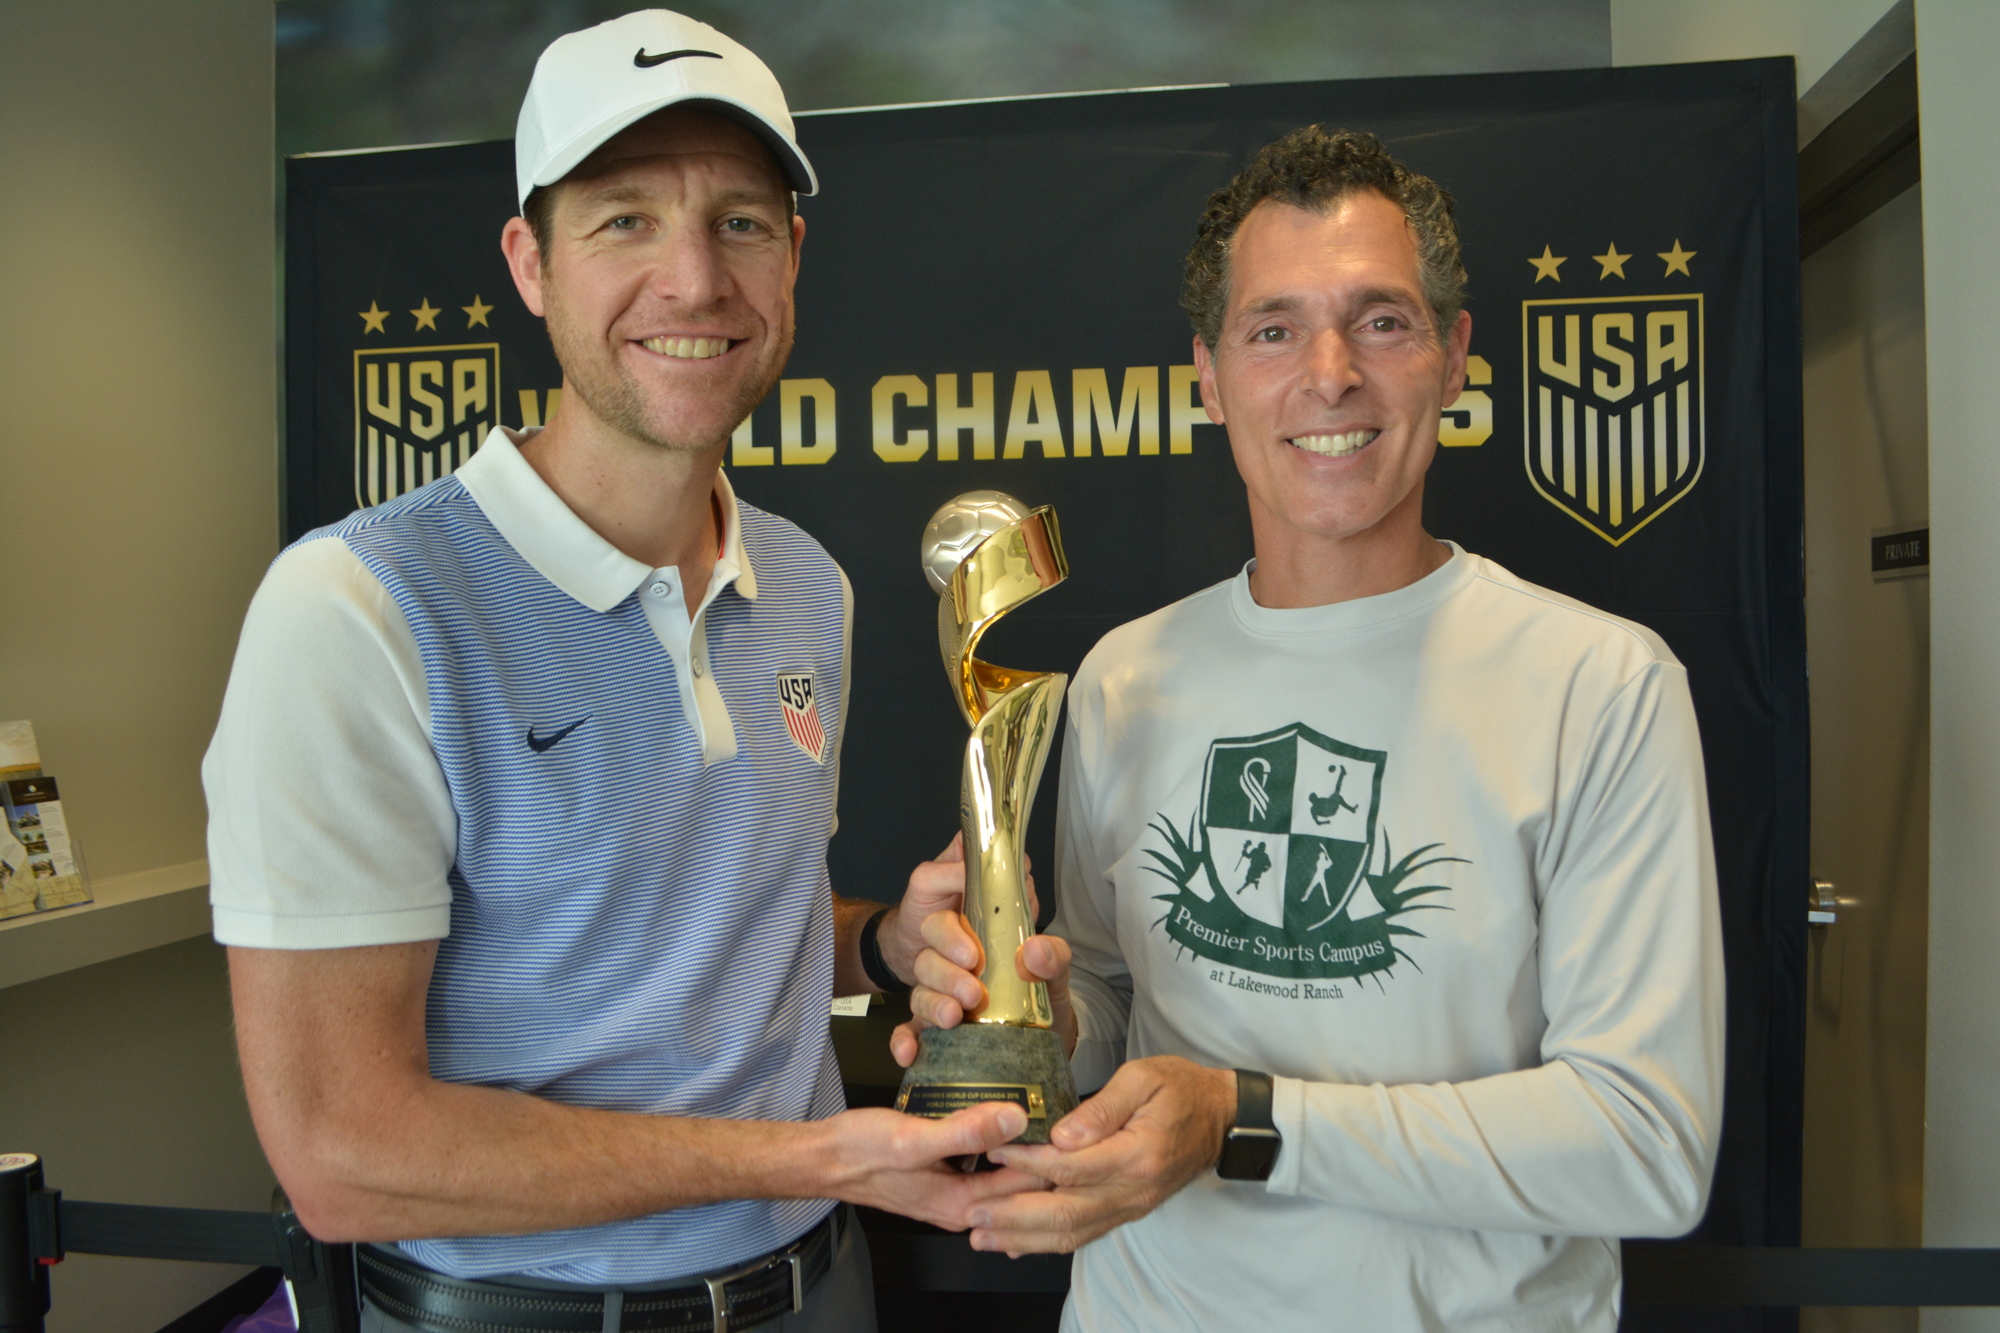 Jared Micklos, the director of Development Academy for the U.S. Soccer Federation, holds the 2015 Women's World Cup trophy with Premier Sports Campus Director Antonio Saviano.